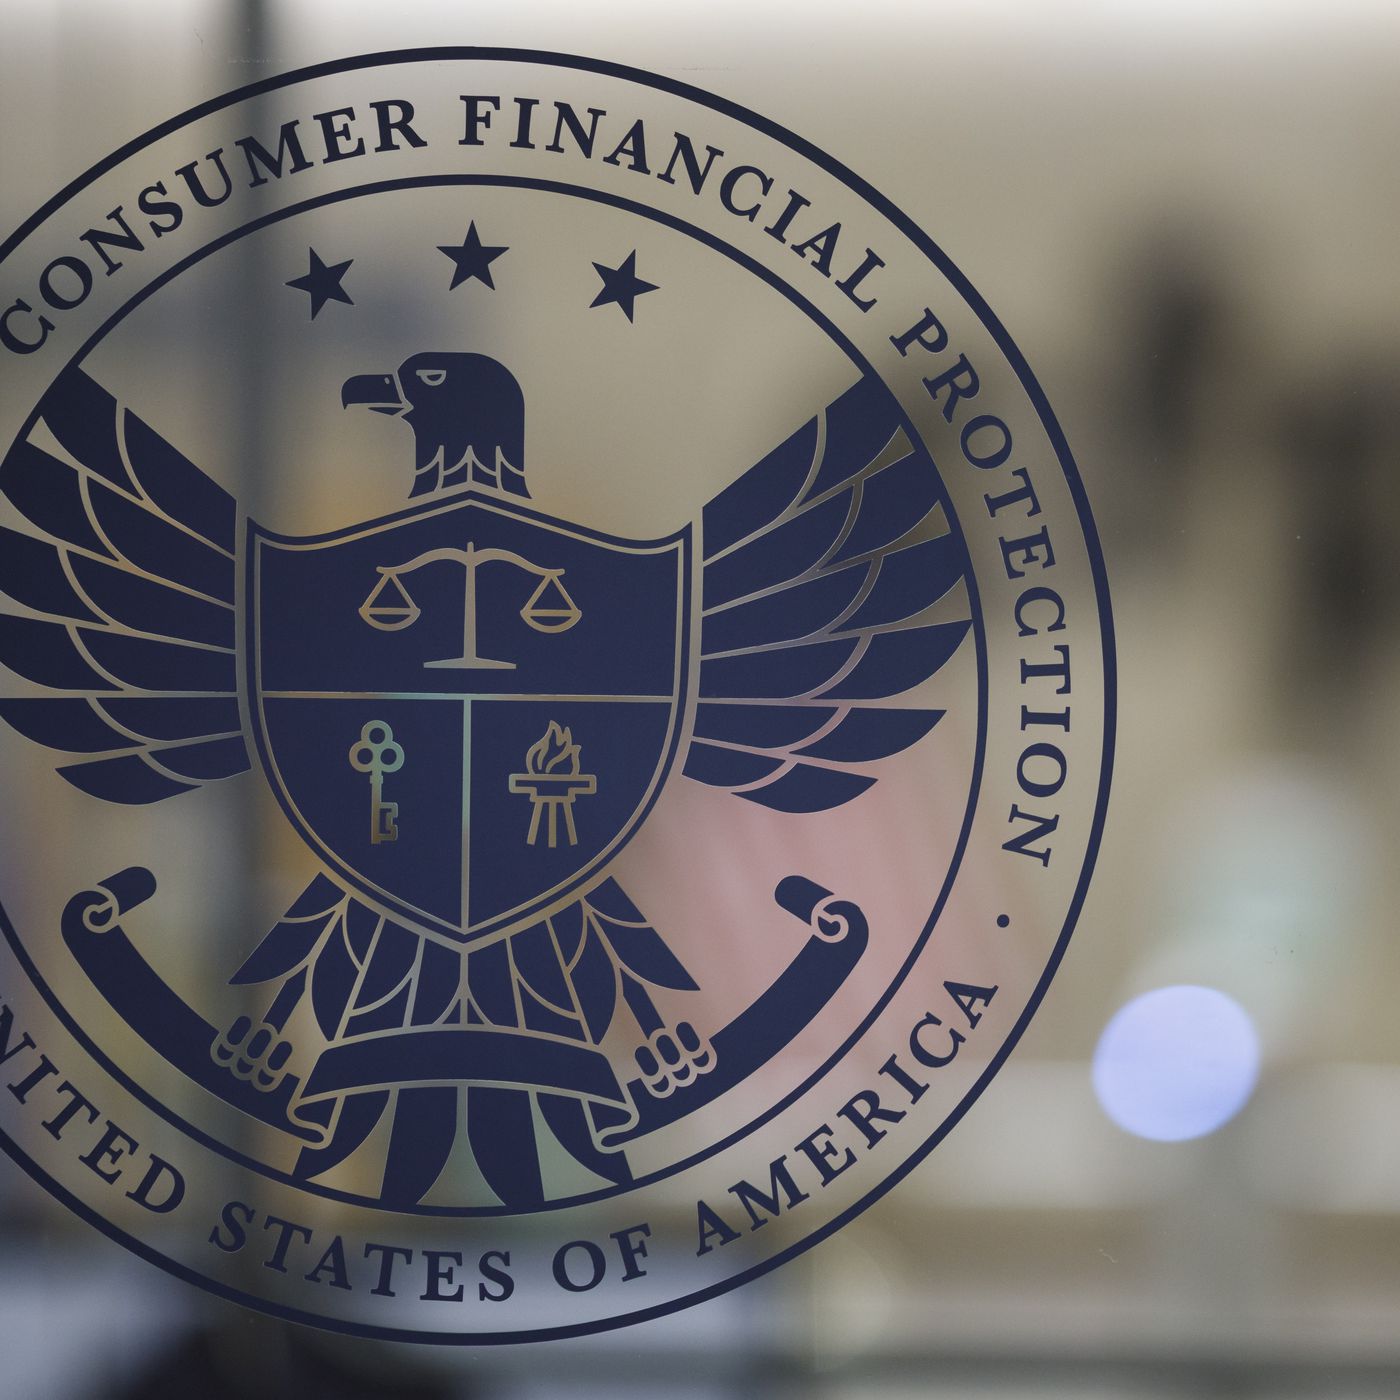 What Federal Act Gave Rise To The Consumer Financial Protection Bureau?